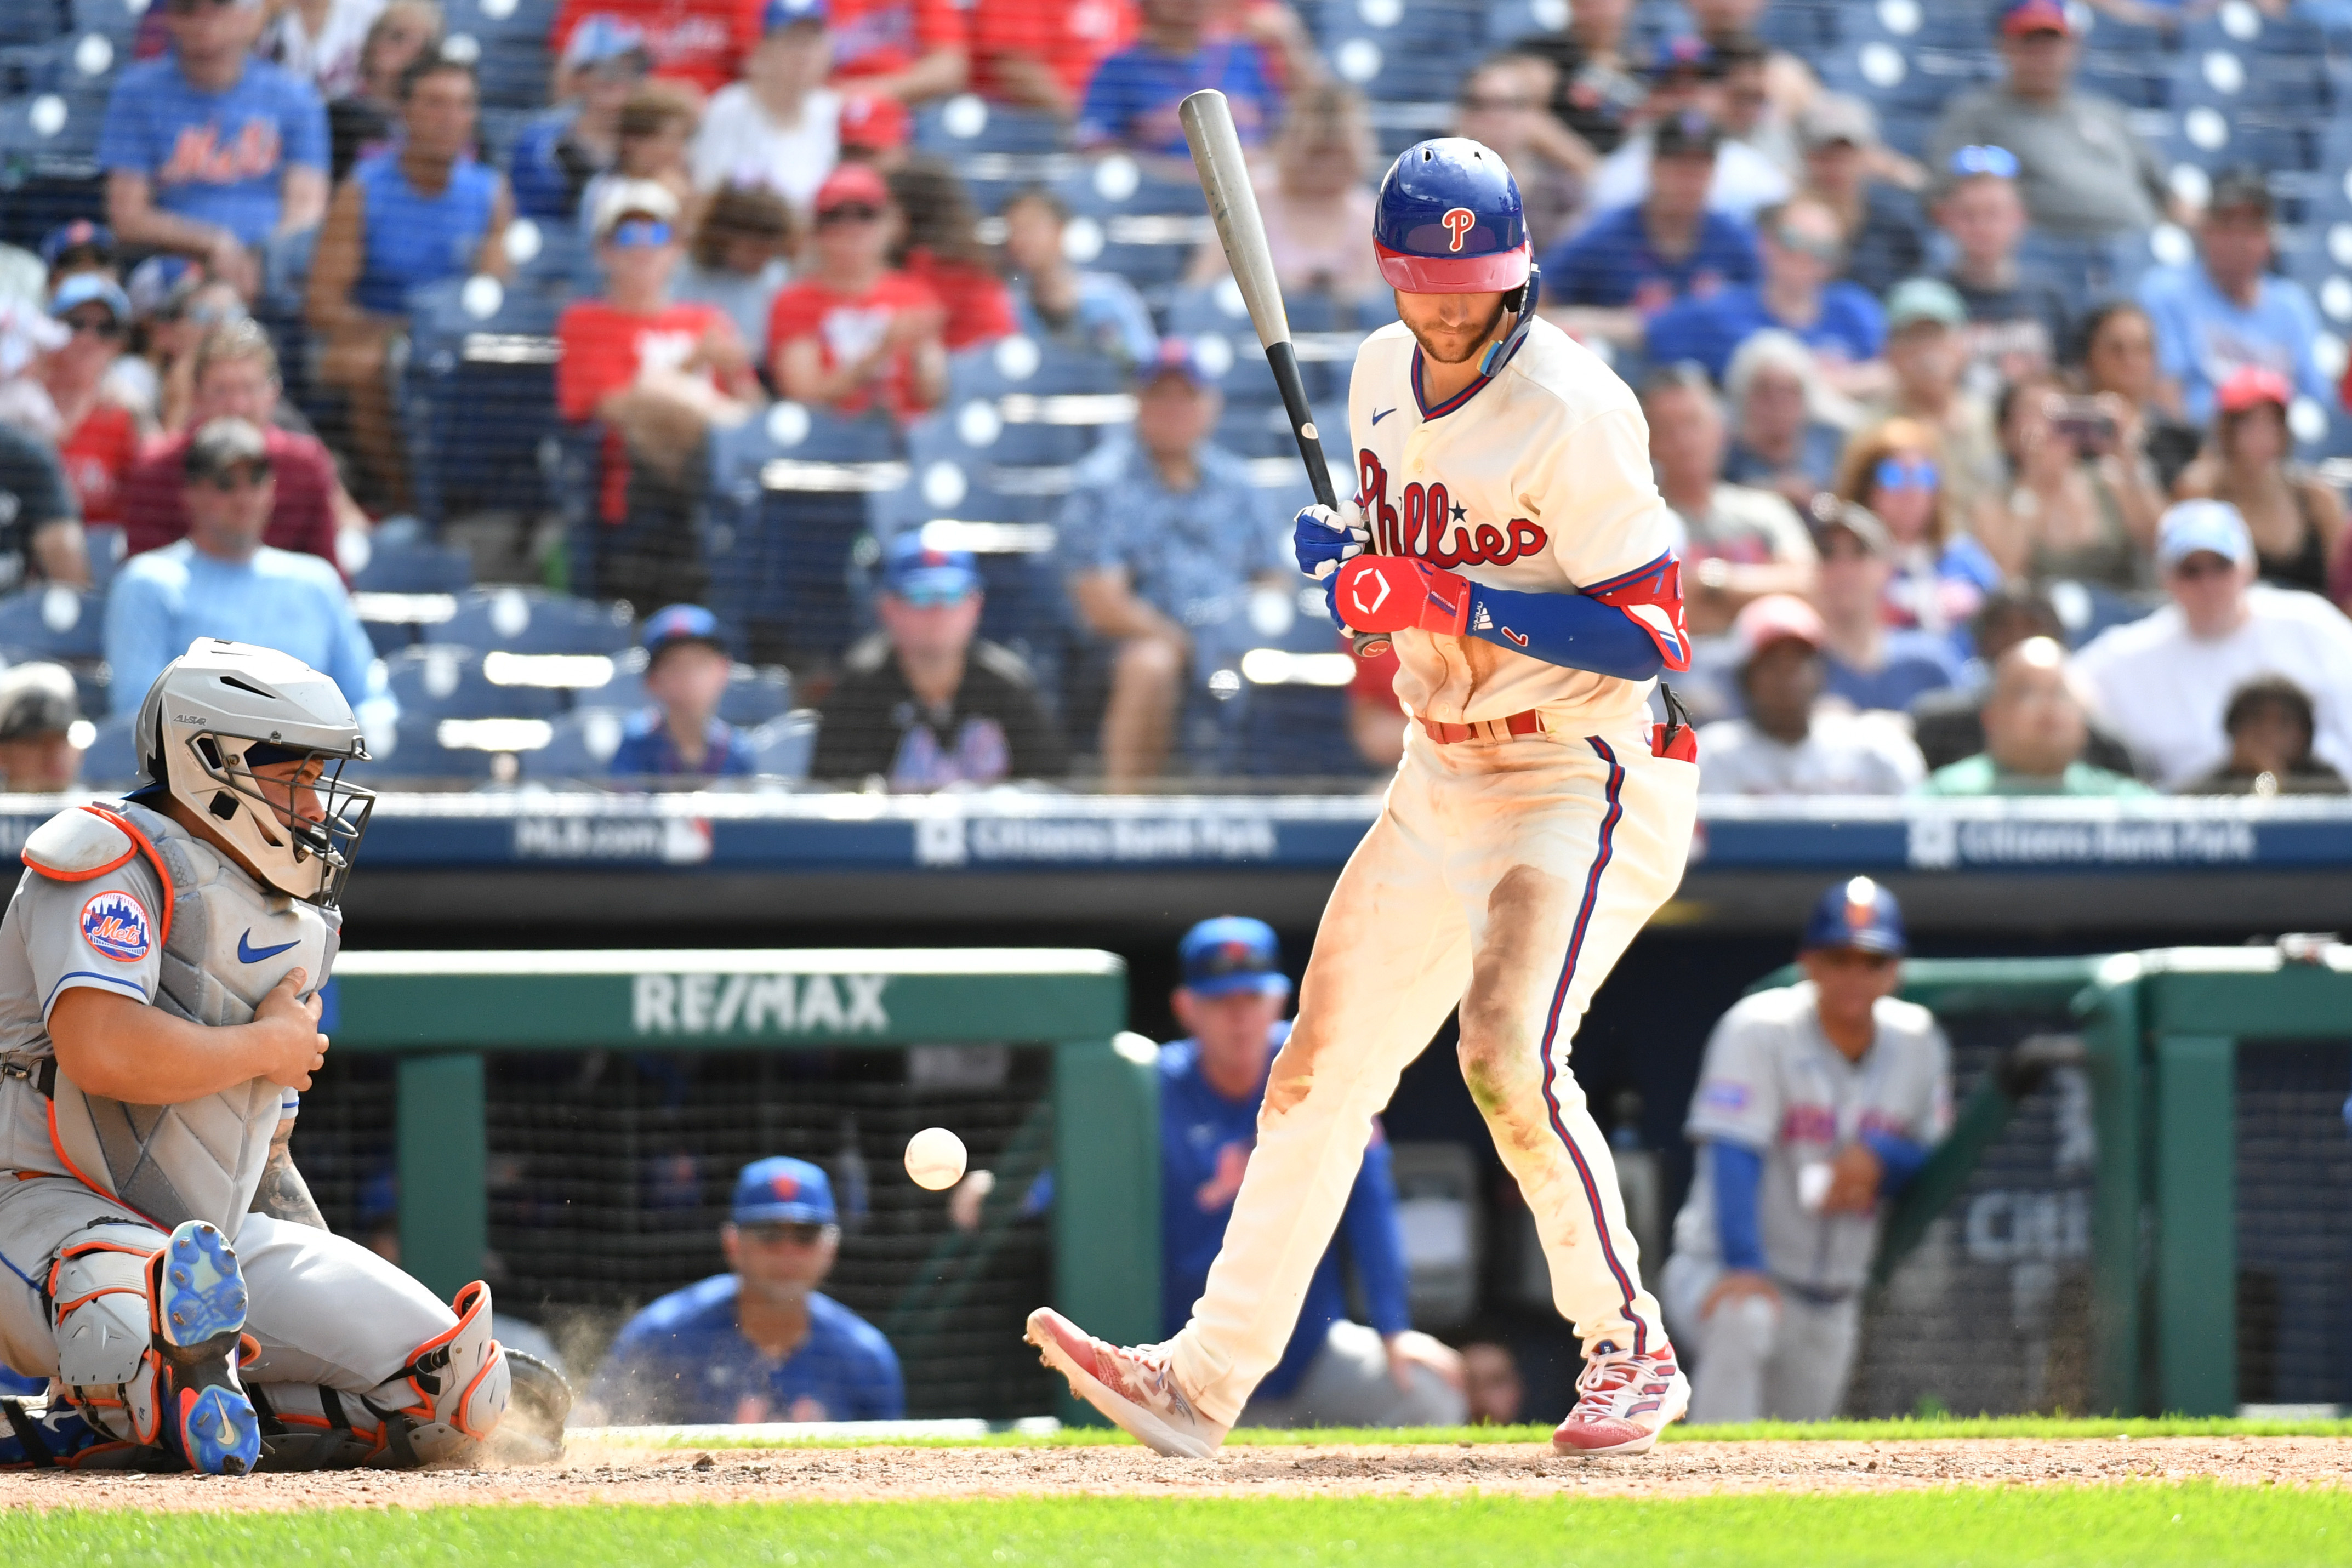 Ibanez leads Phillies to 6-5 win over Mets - The San Diego Union-Tribune